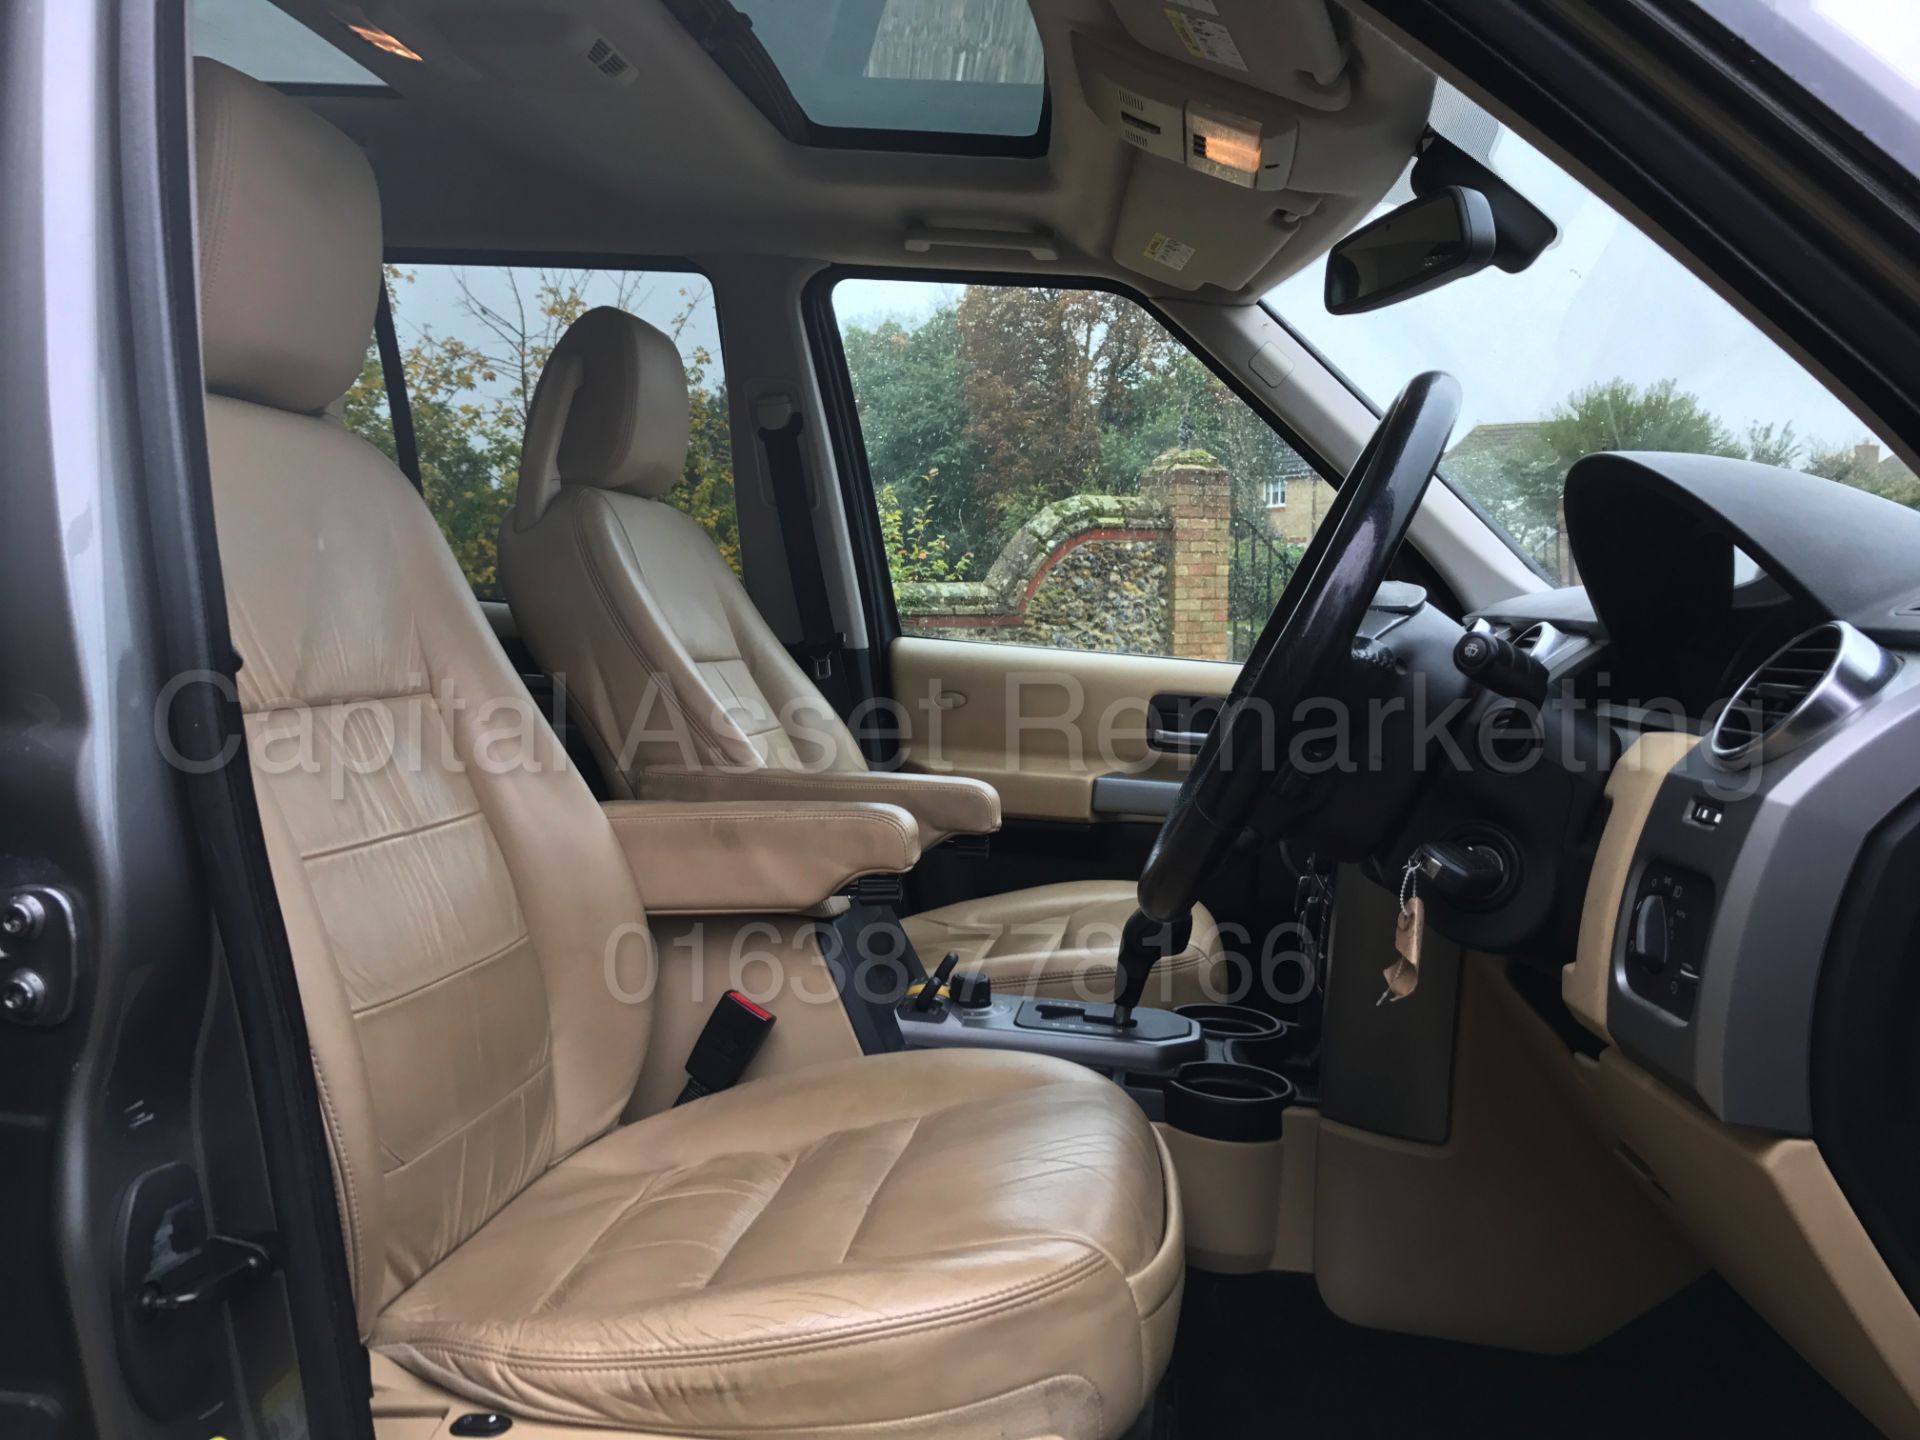 LAND ROVER DISCOVERY 3 HSE (2008 - 08 REG) 'TDV6 - AUTO - LEATHER - SAT NAV - 7 SEATER' *1 OWNER* - Image 21 of 37